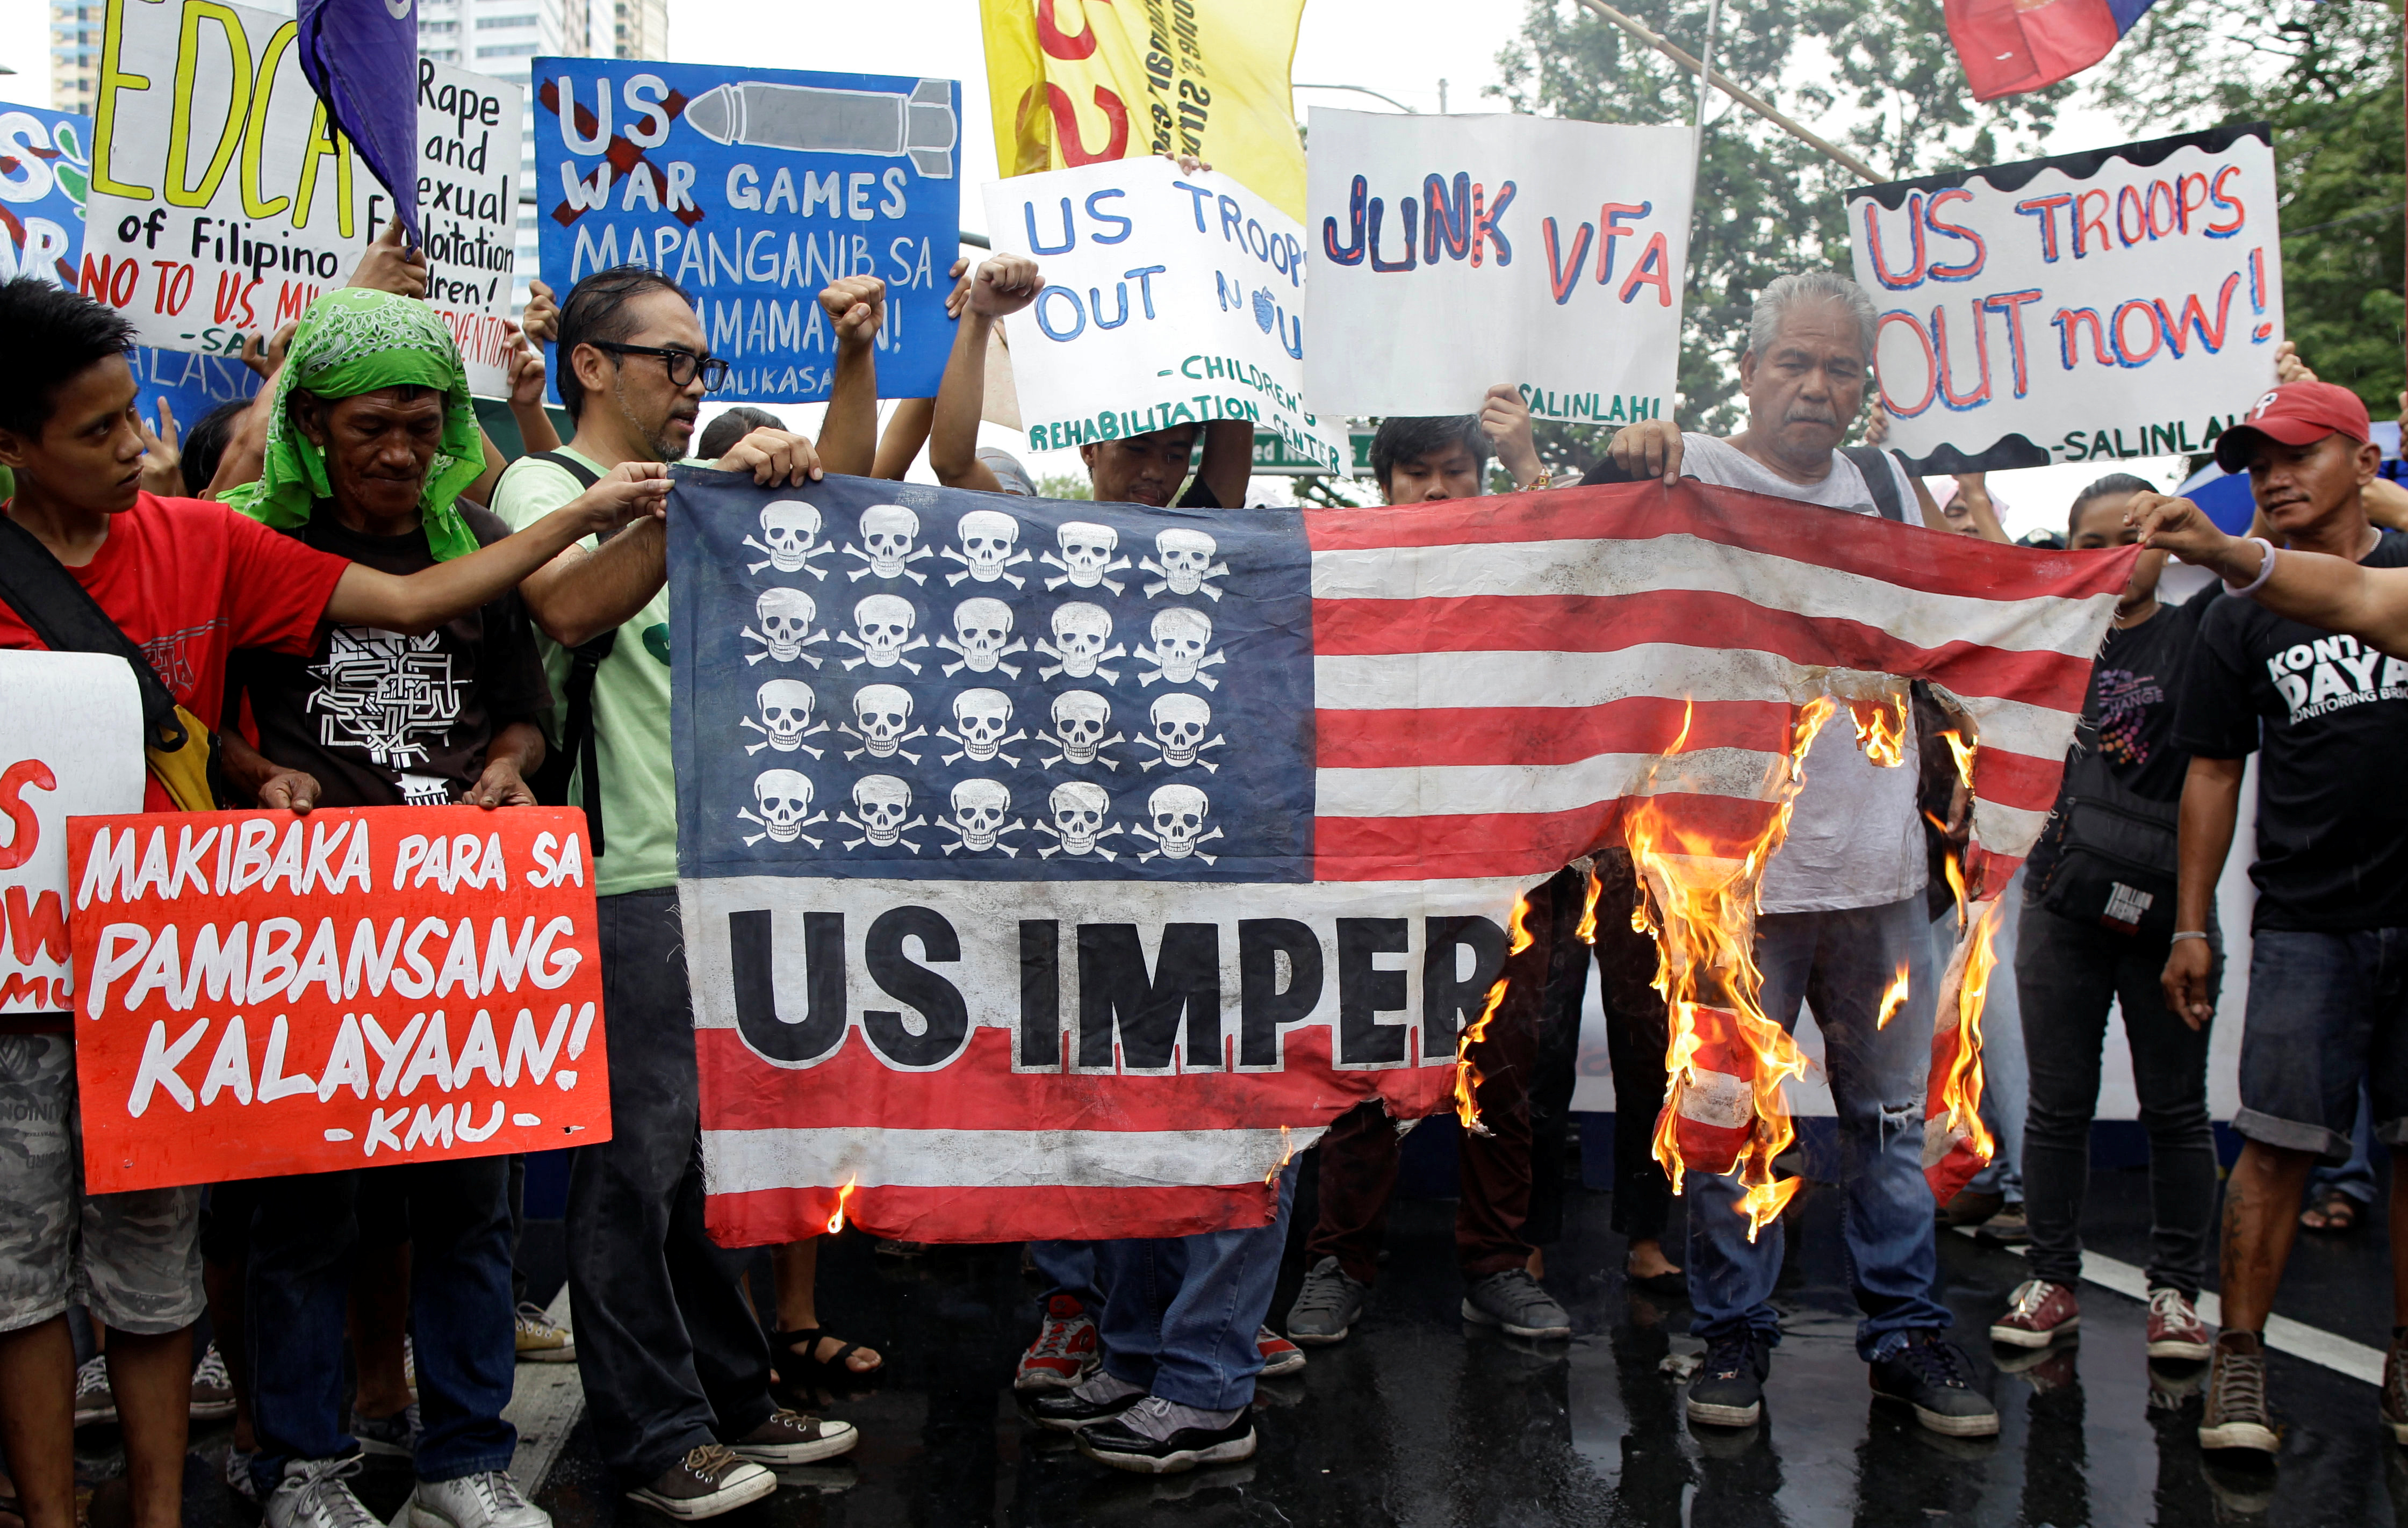 Demonstrators burn a mock U.S. flag during a rally opposing the U.S.-Philippines joint military exercises outside the U.S. embassy in Manila on Oct. 4, 2016 (Czar Dancel—Reuters)